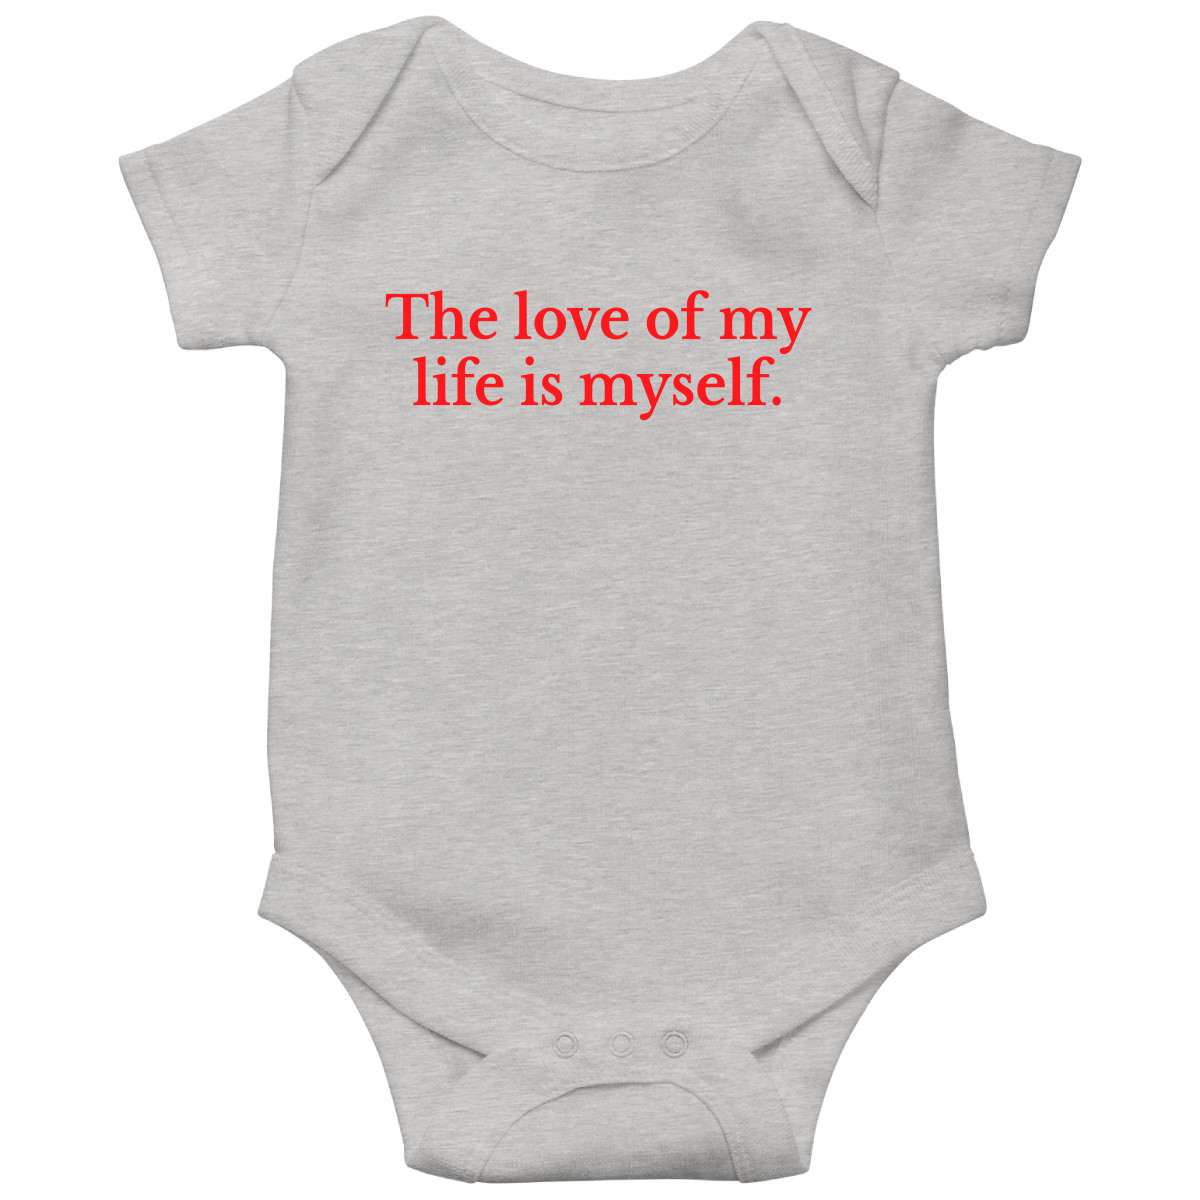 The love of my life is myself Baby Bodysuits | Gray